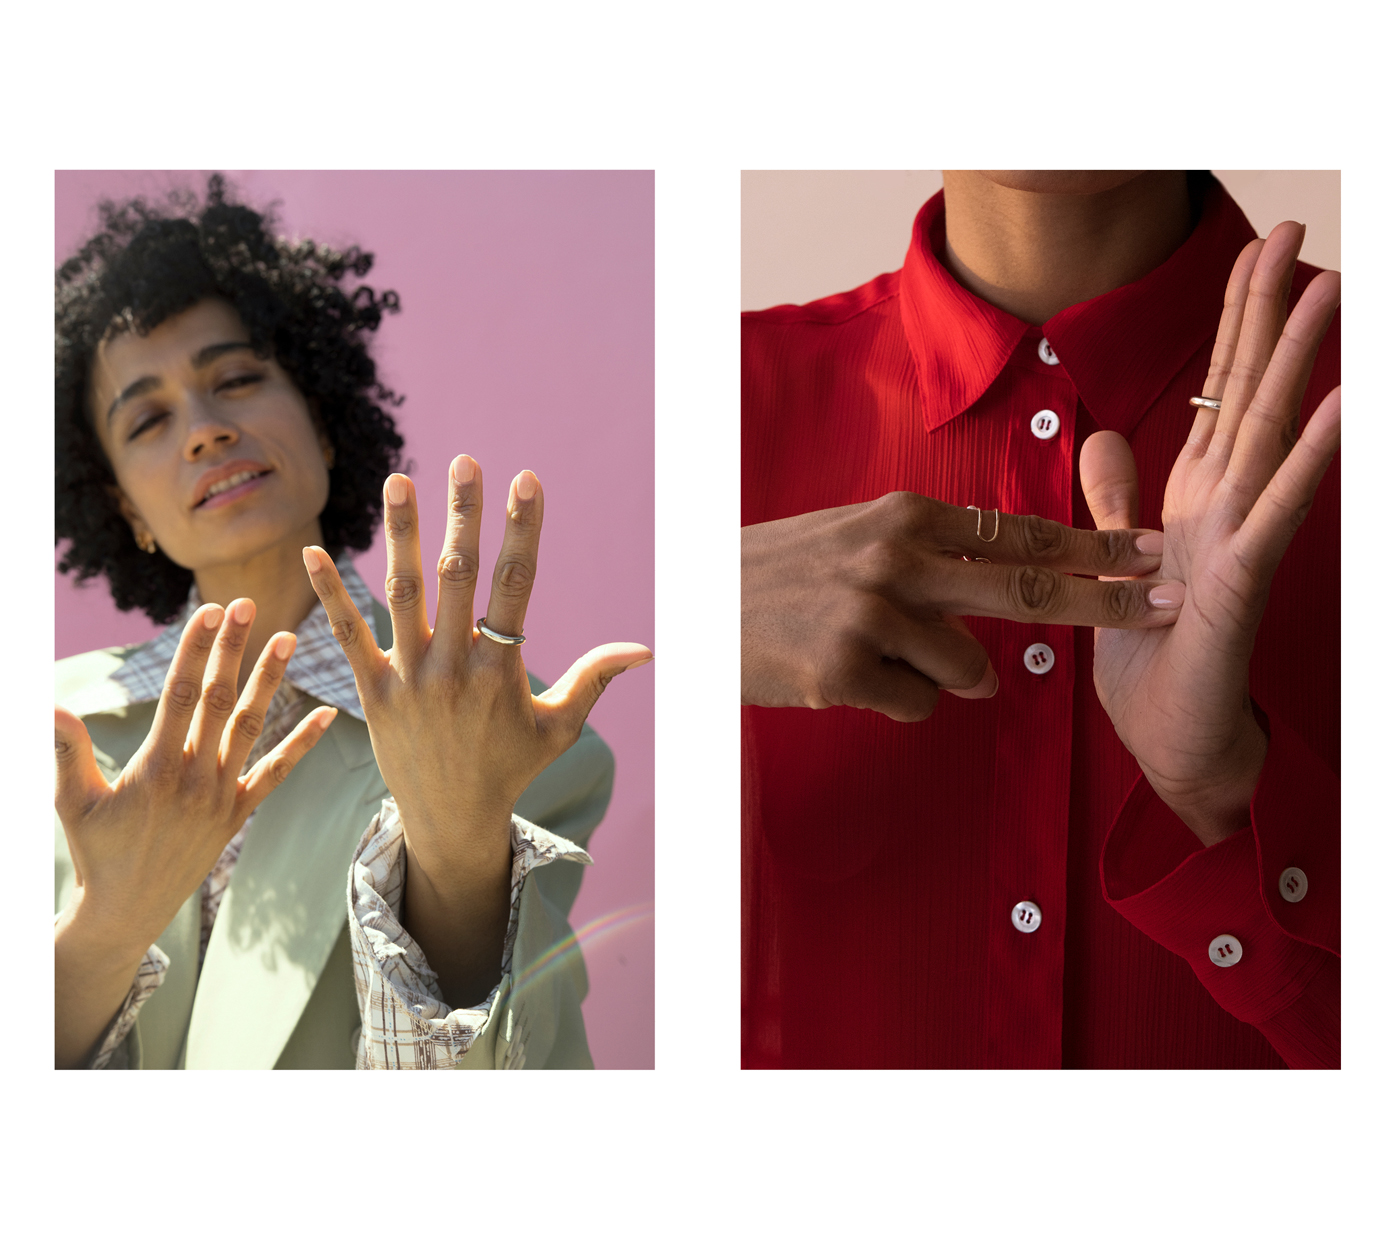 Left: Jacket by Sies Marjan. Shirt by The Break. Ring by Bonheur.Right: Dress by Y/Project. Ring on left hand by Bonheur.